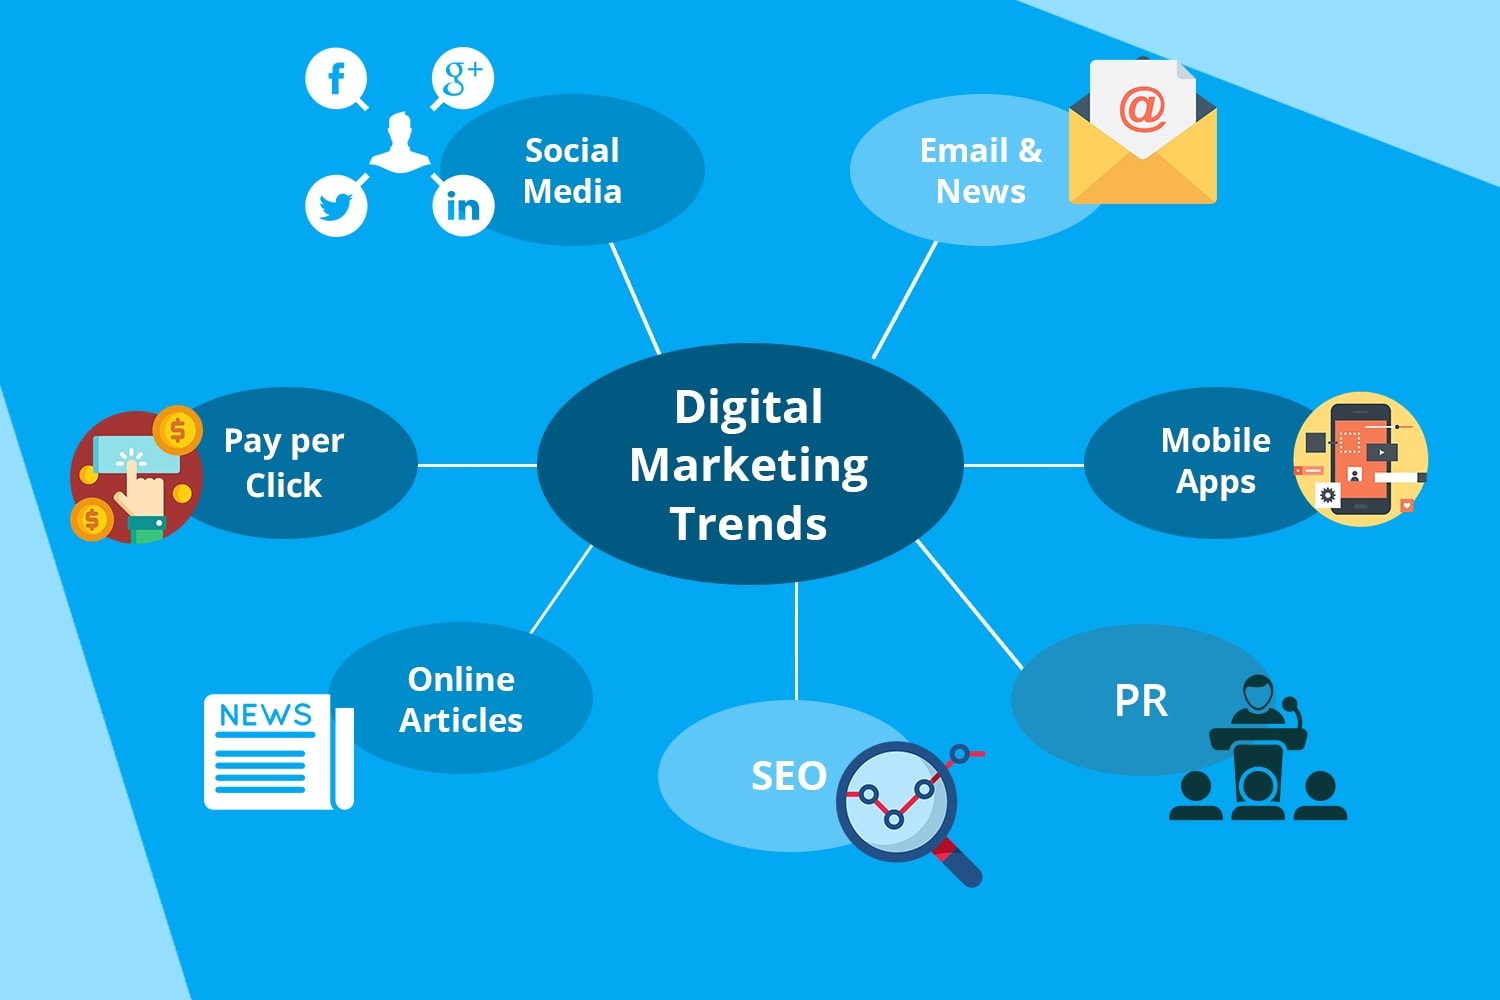 Top 5 Digital Marketing Trends in 2022 to watch out for